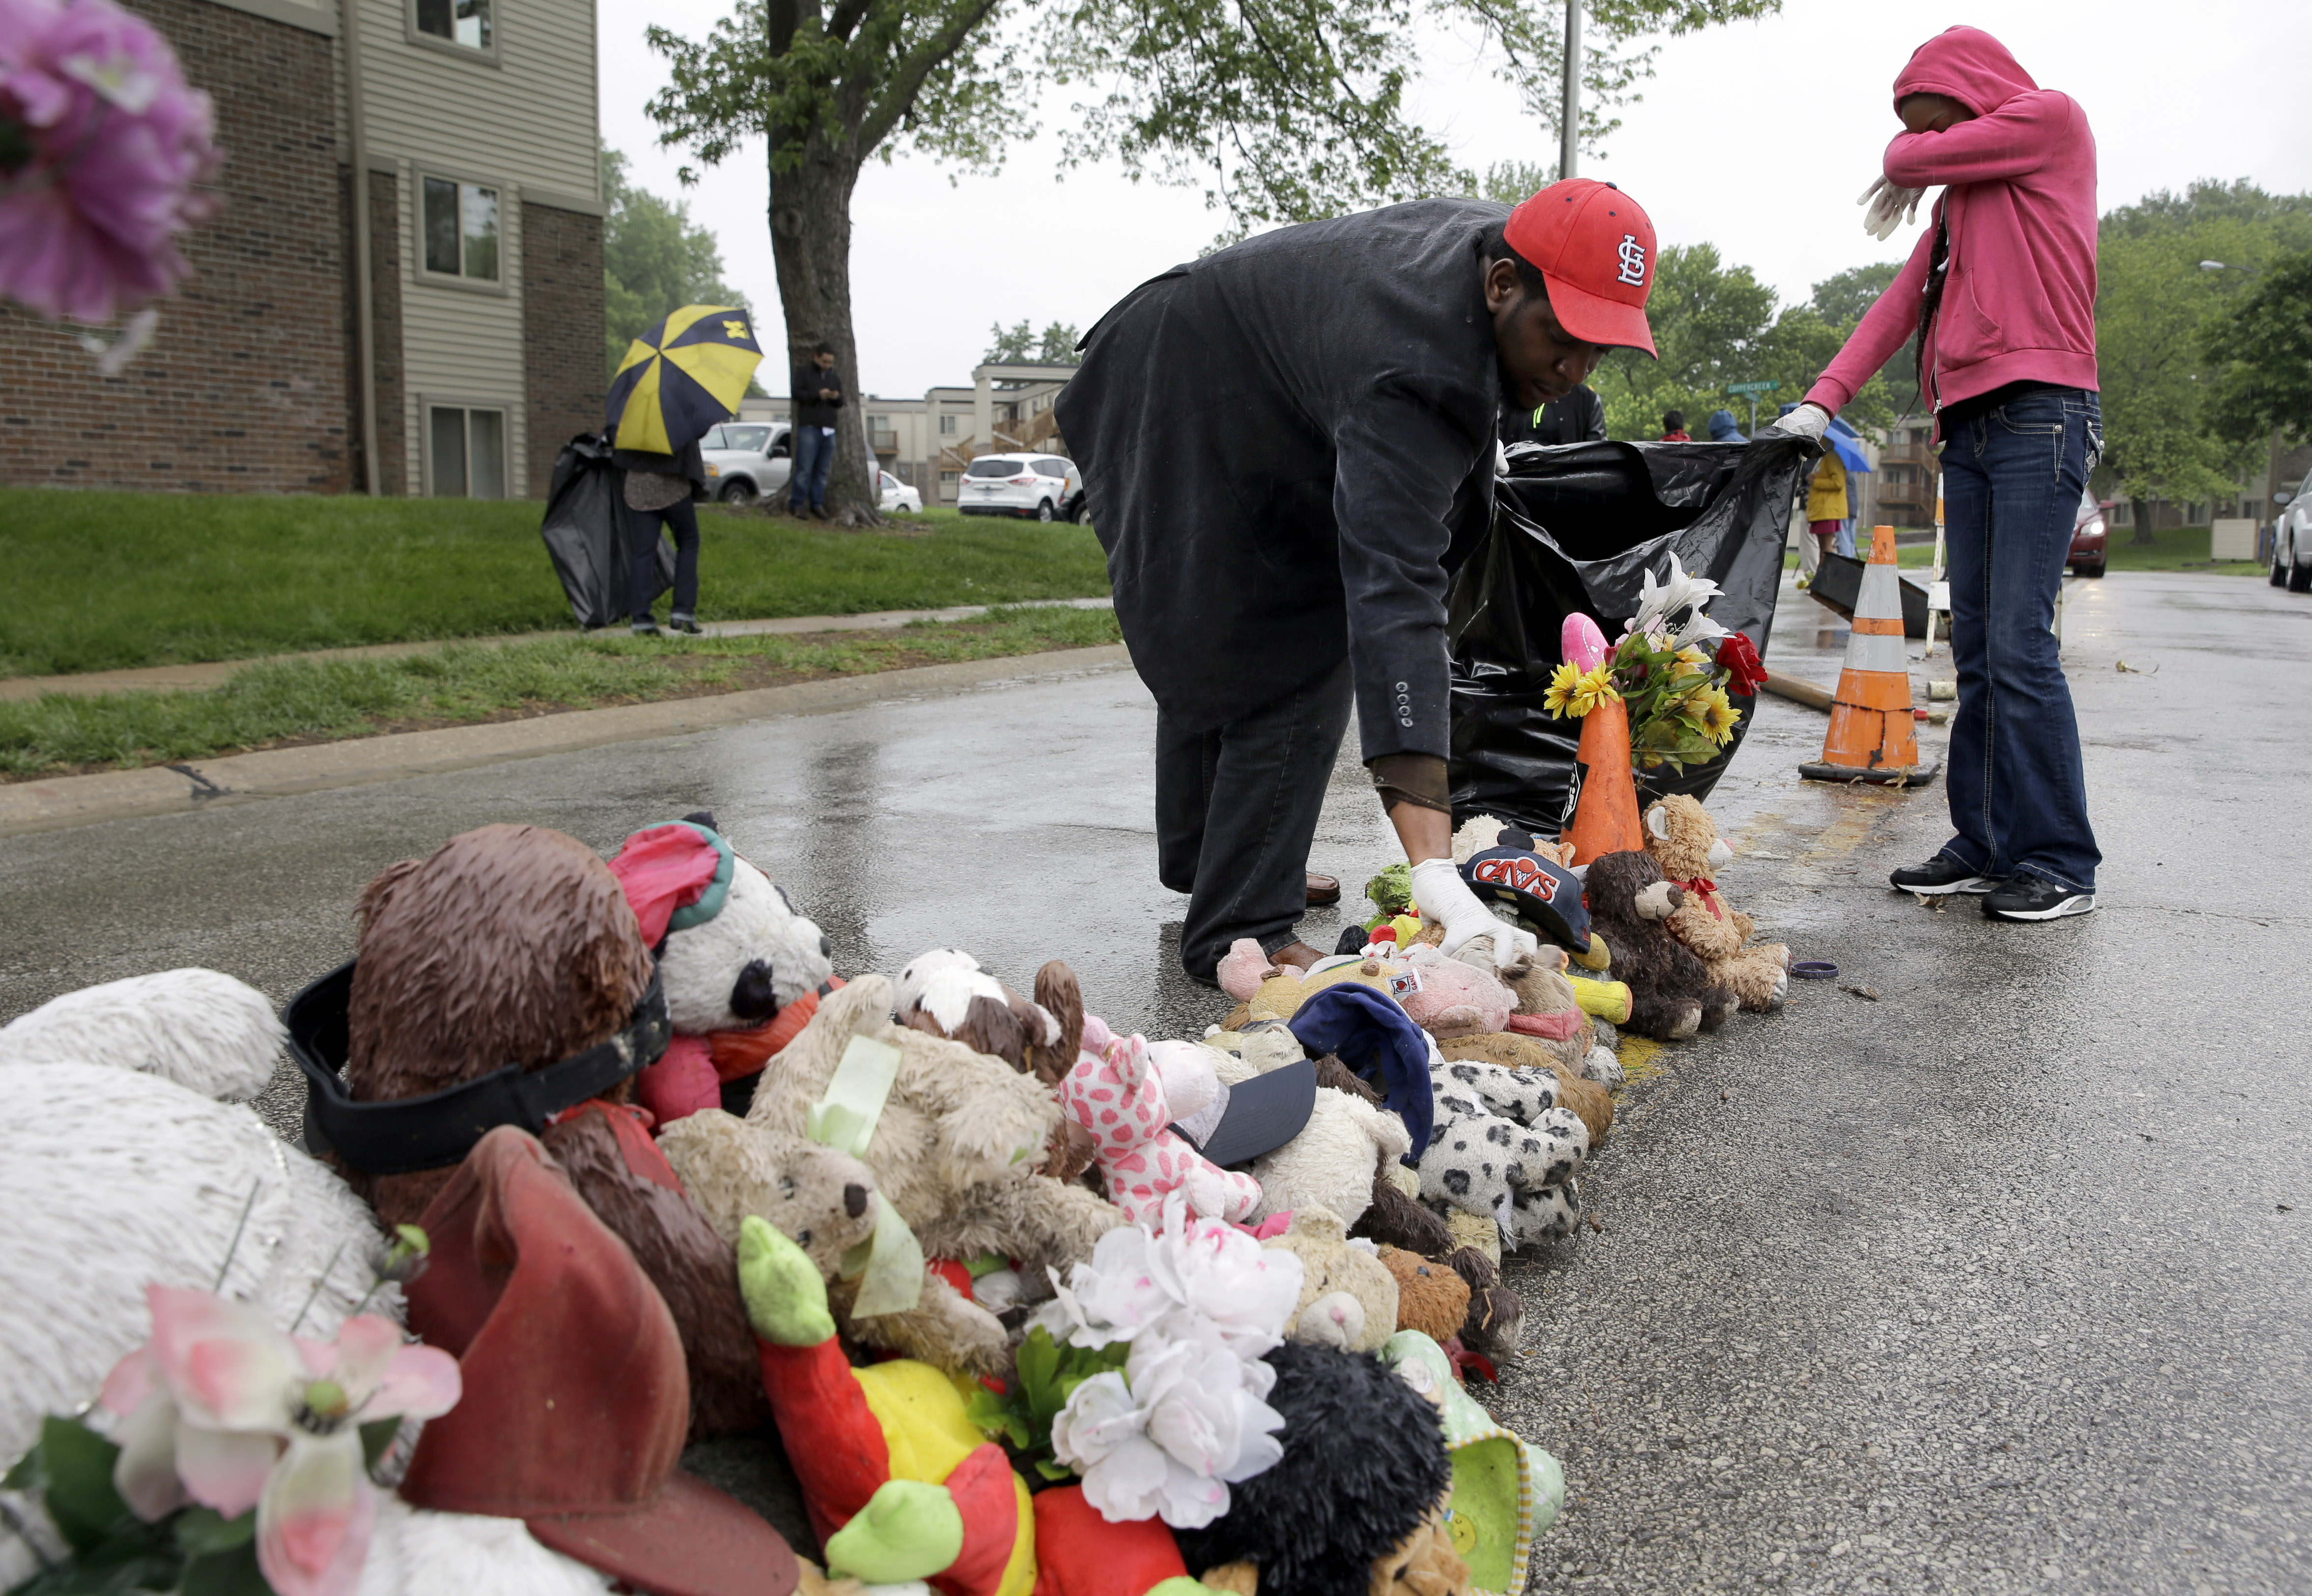 Volunteers Cheyenne Green, right, and Derrick Robinson help remove items left at a makeshift memorial to Michael Brown Wednesday, May 20, 2015, in Ferguson, Mo.